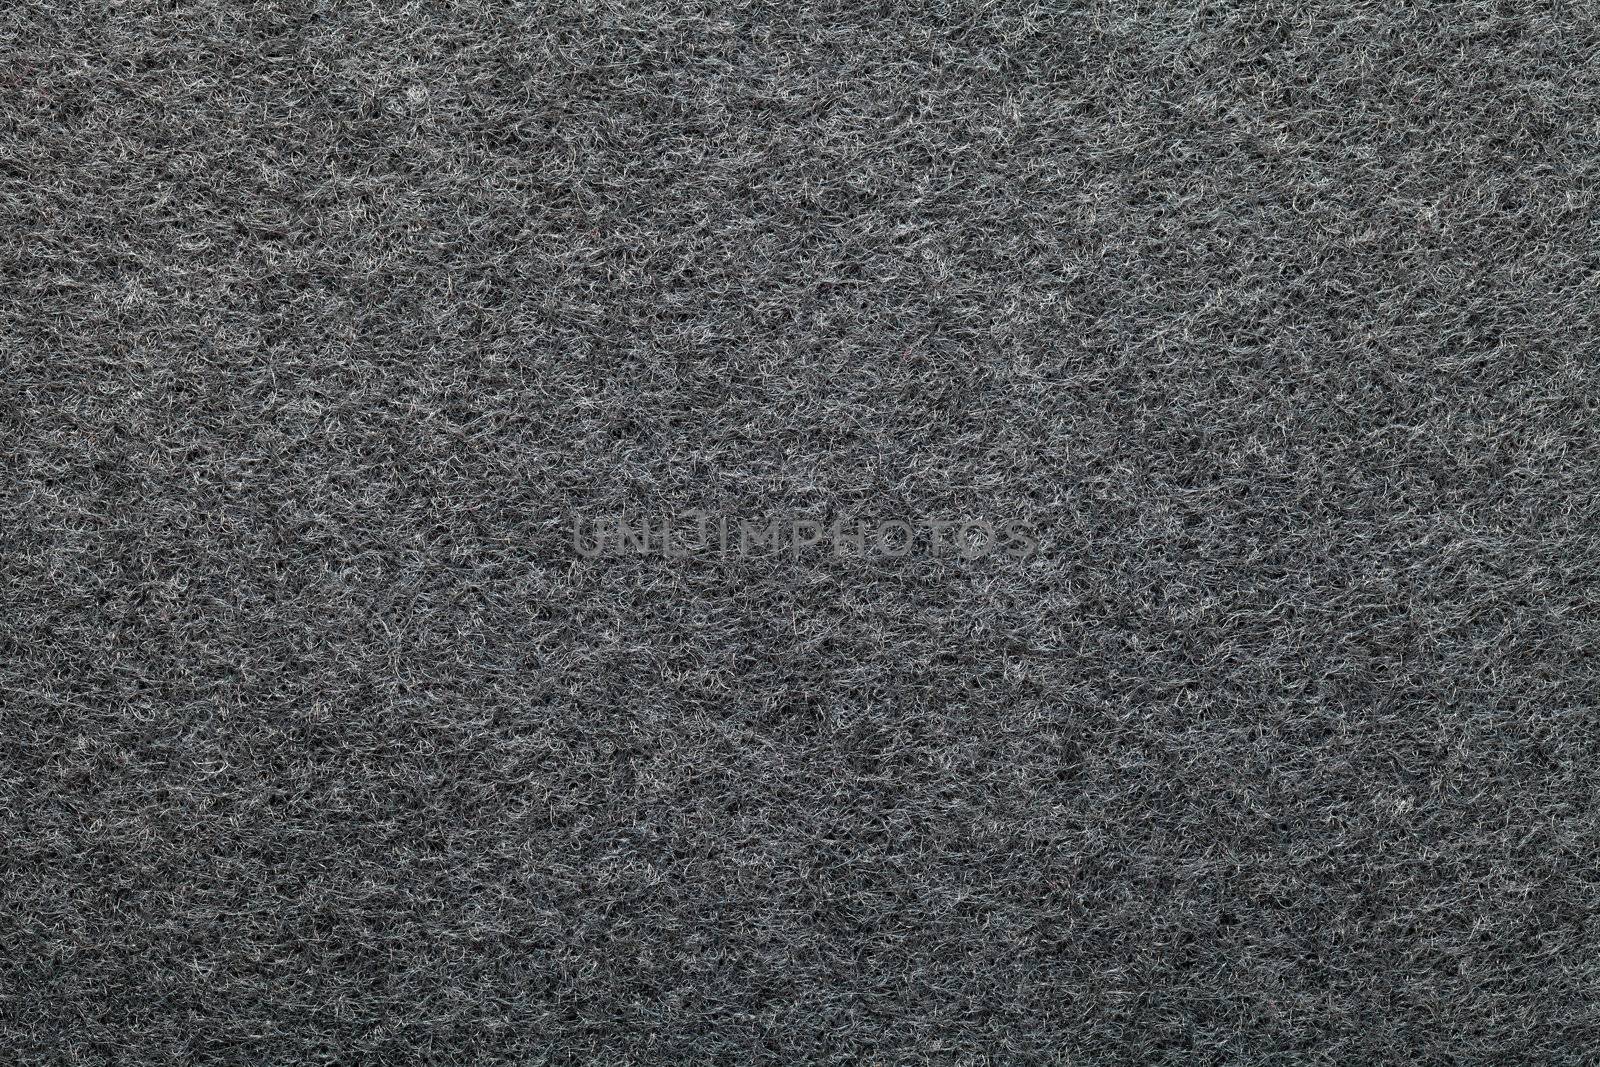 Dark gray artificial cotton texture for background. Top view